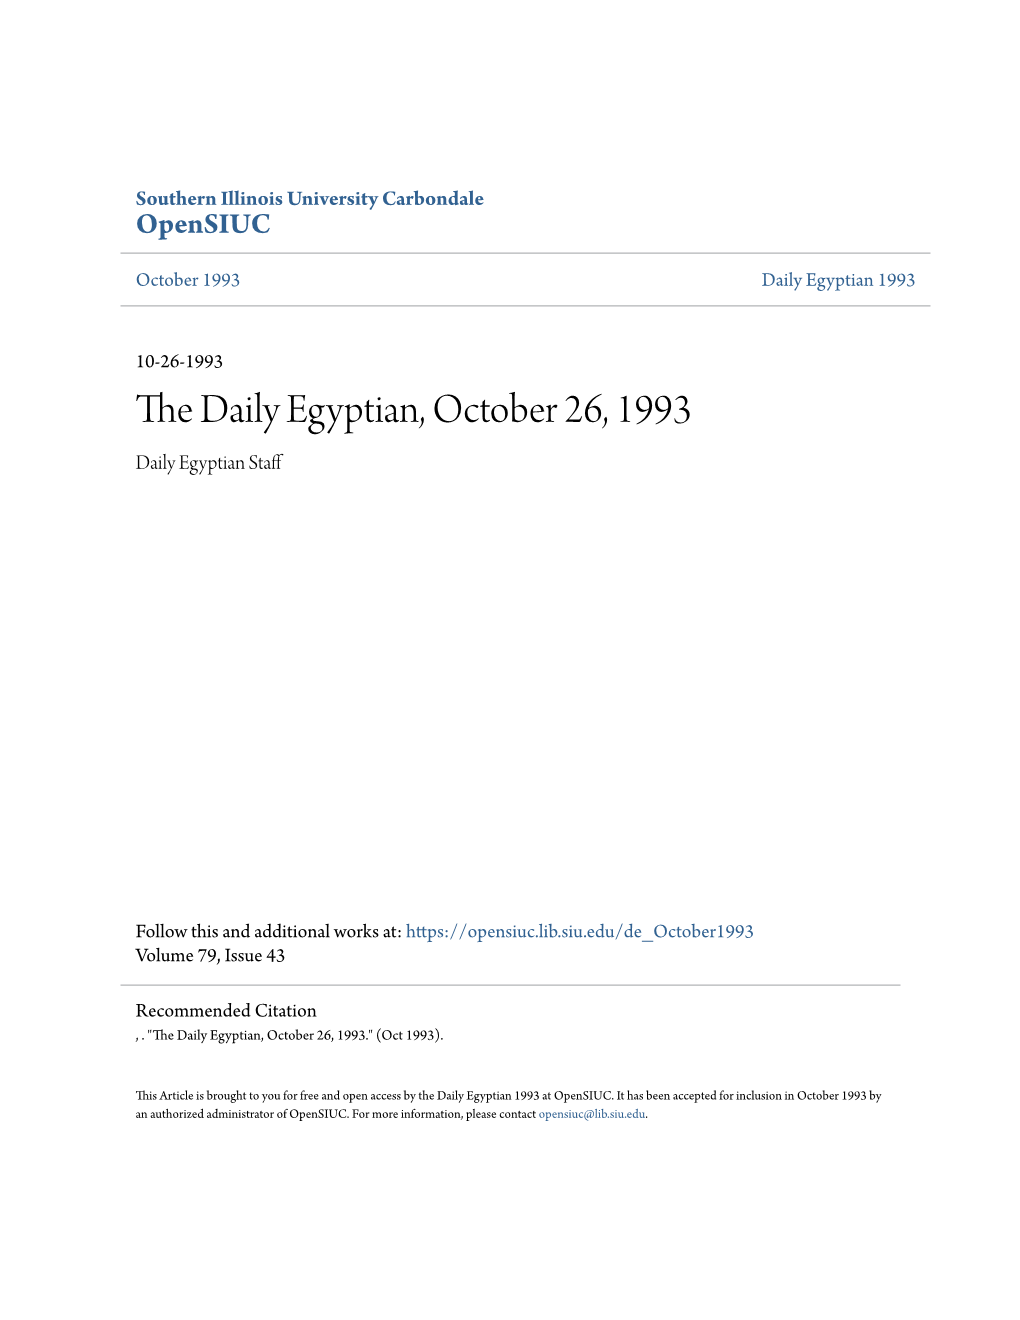 The Daily Egyptian, October 26, 1993